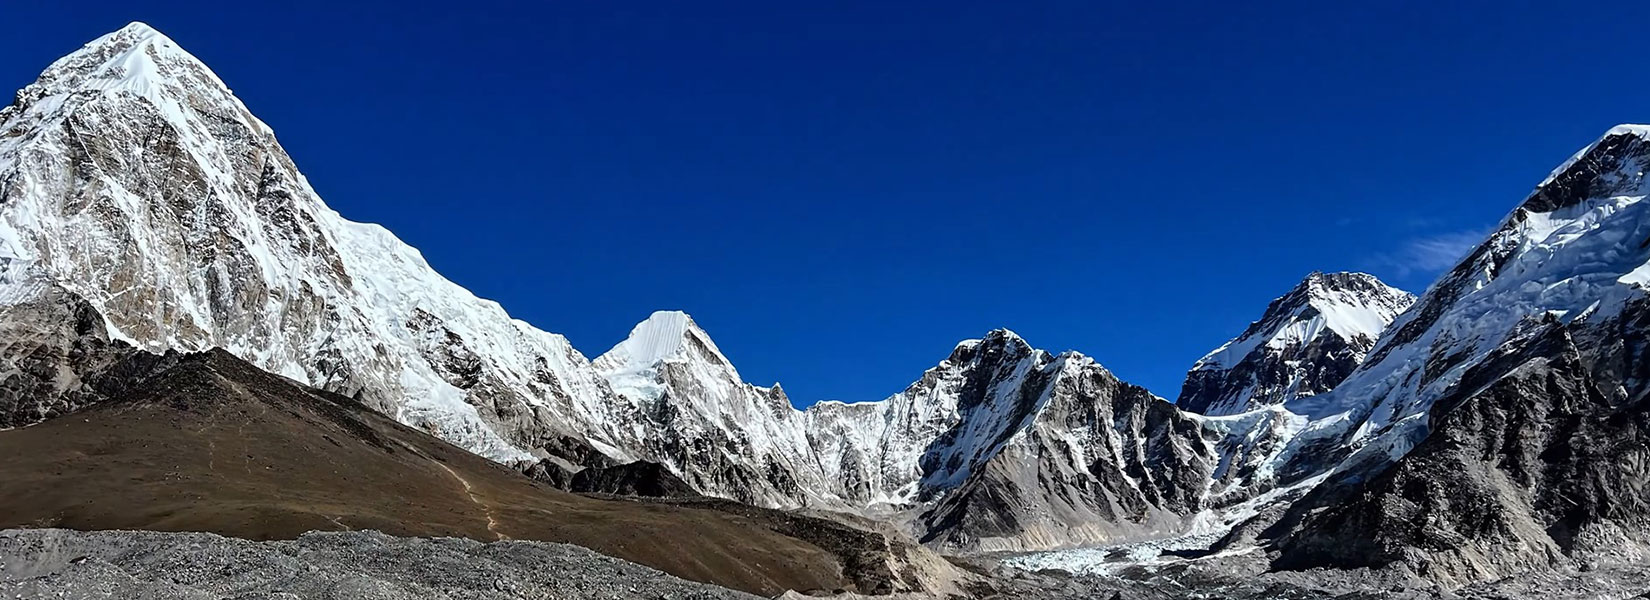 Explore the closest view of Mount Everest from Kala Patthar